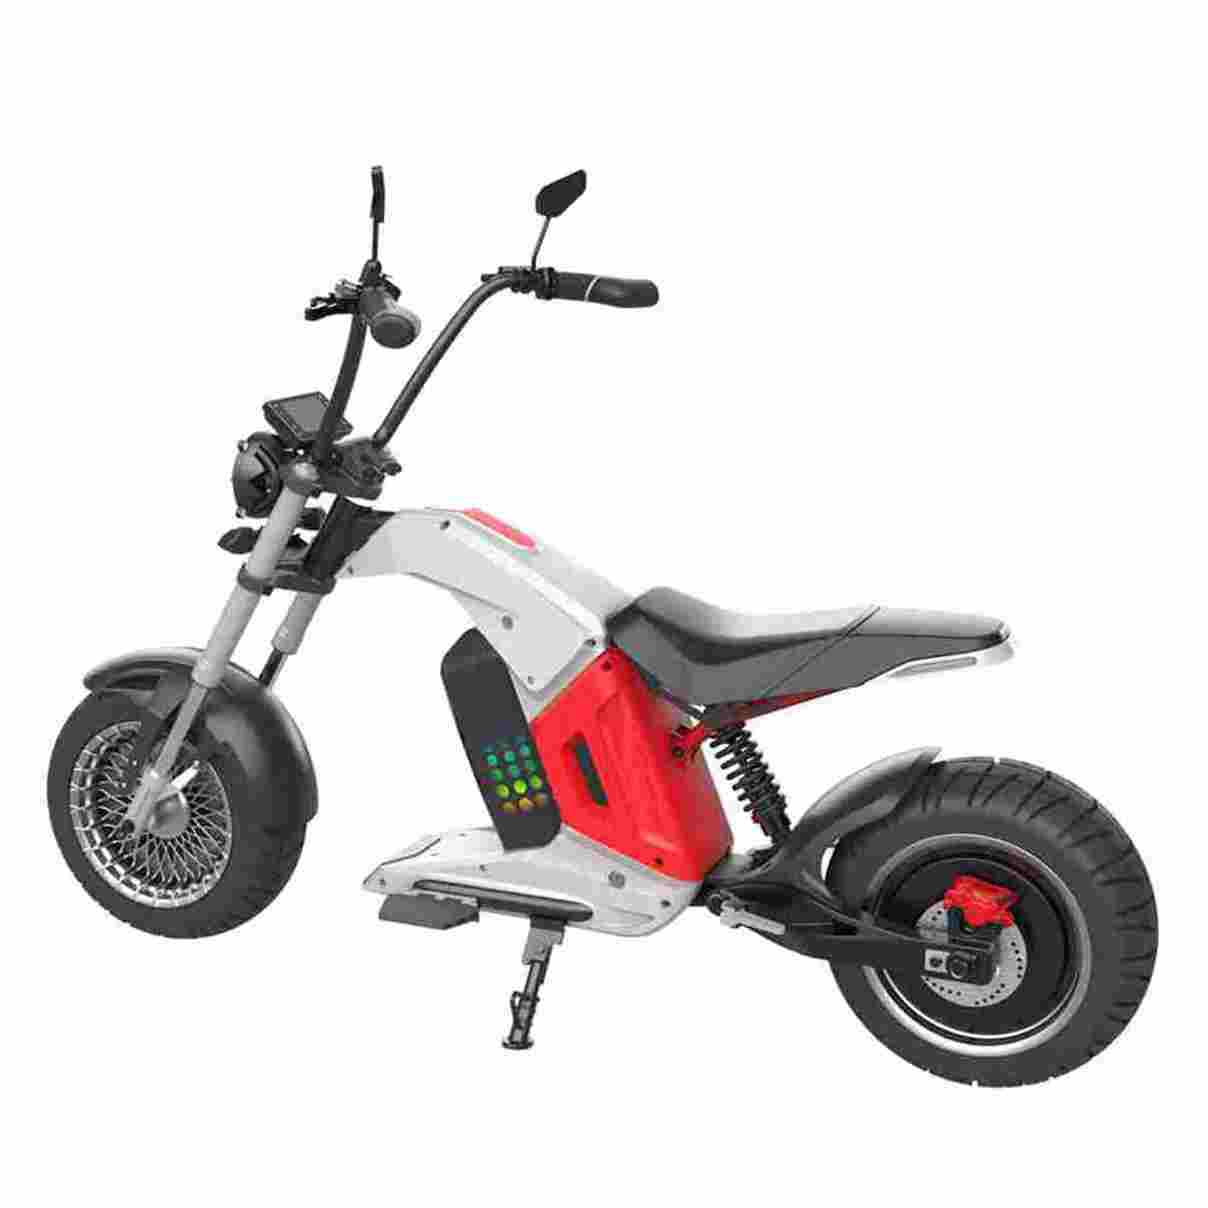 Street Legal Electric Motorcycle For Adults factory OEM Wholesale